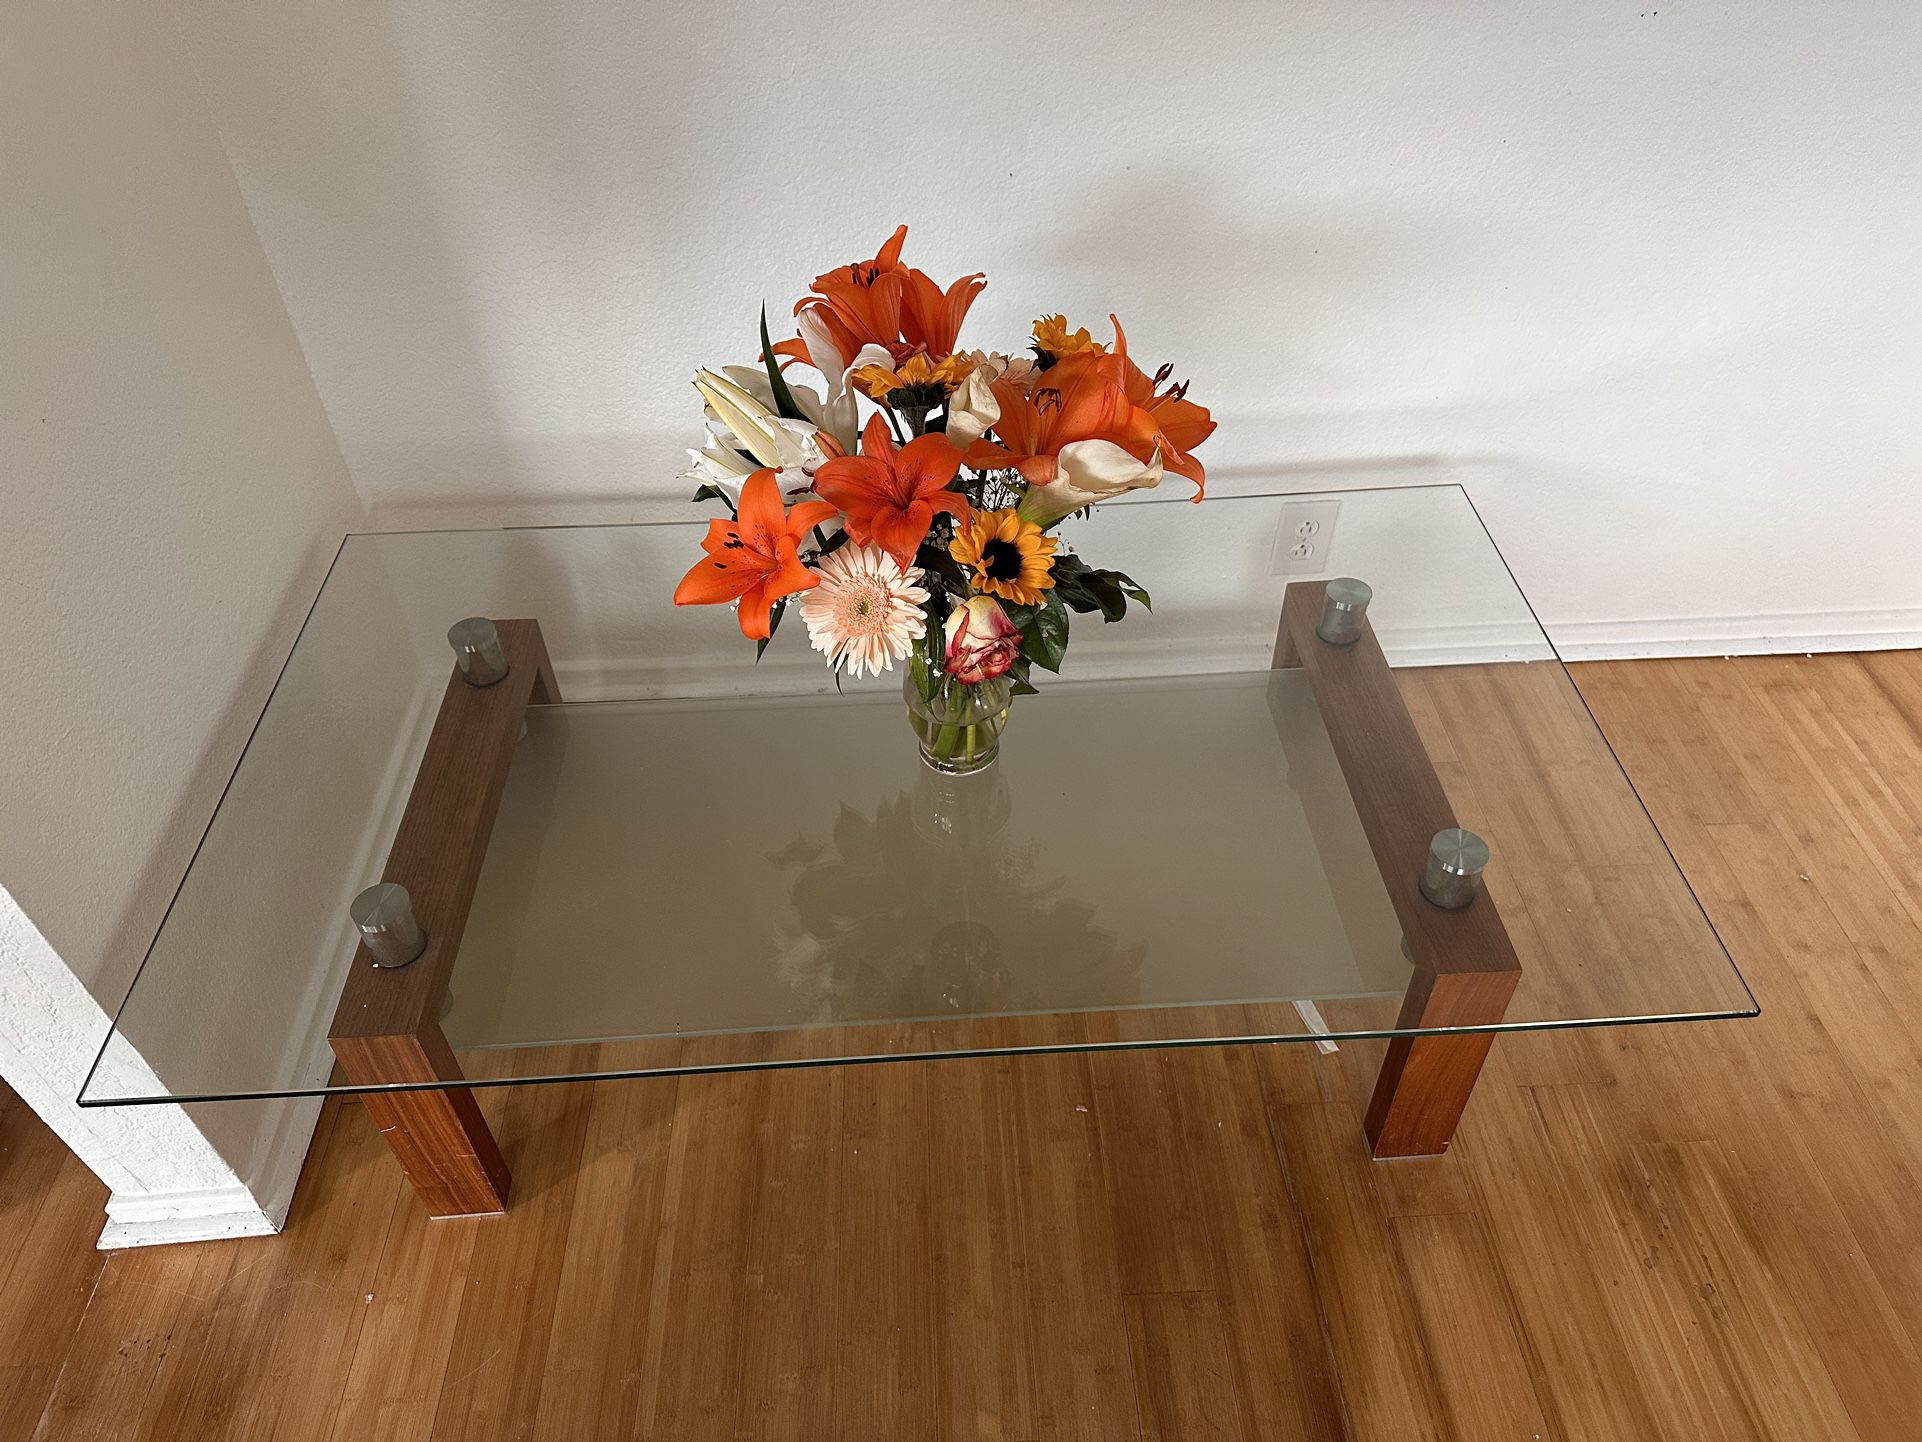 Architectural Coffee table $50